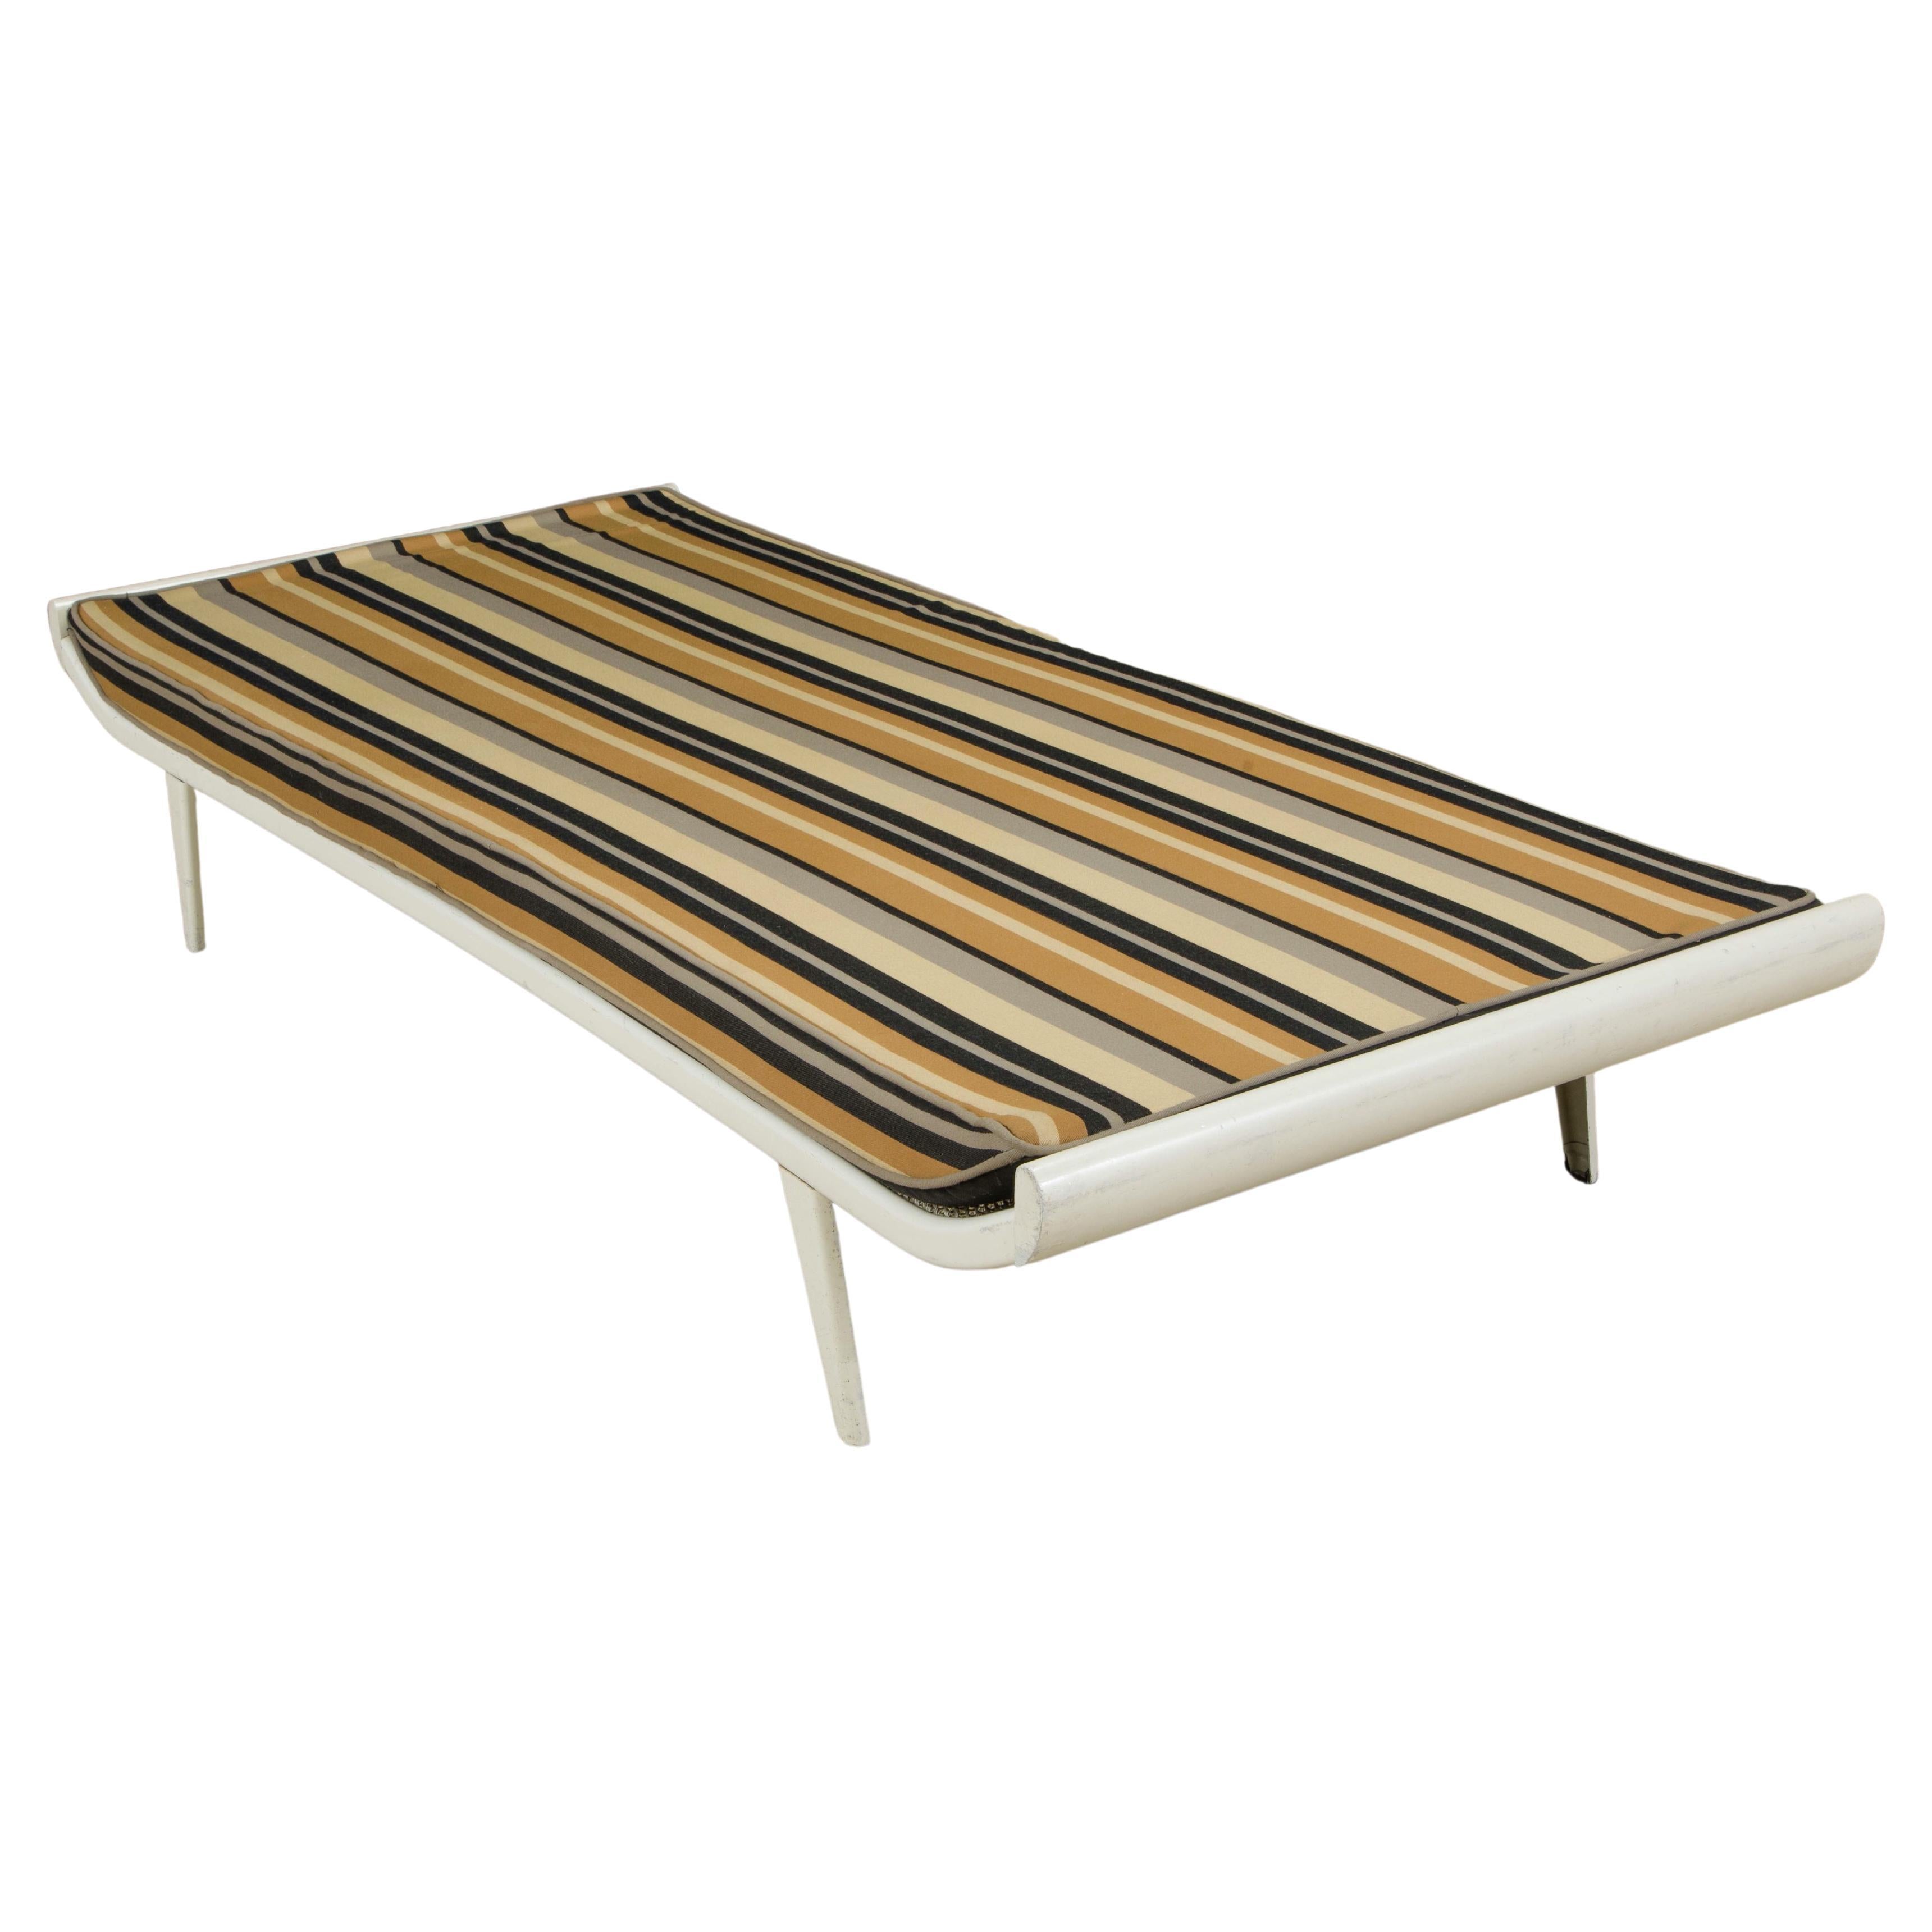 'Cleopatra' Daybed by A.R. Cordemeijer for Auping Netherlands, c. 1953, Signed